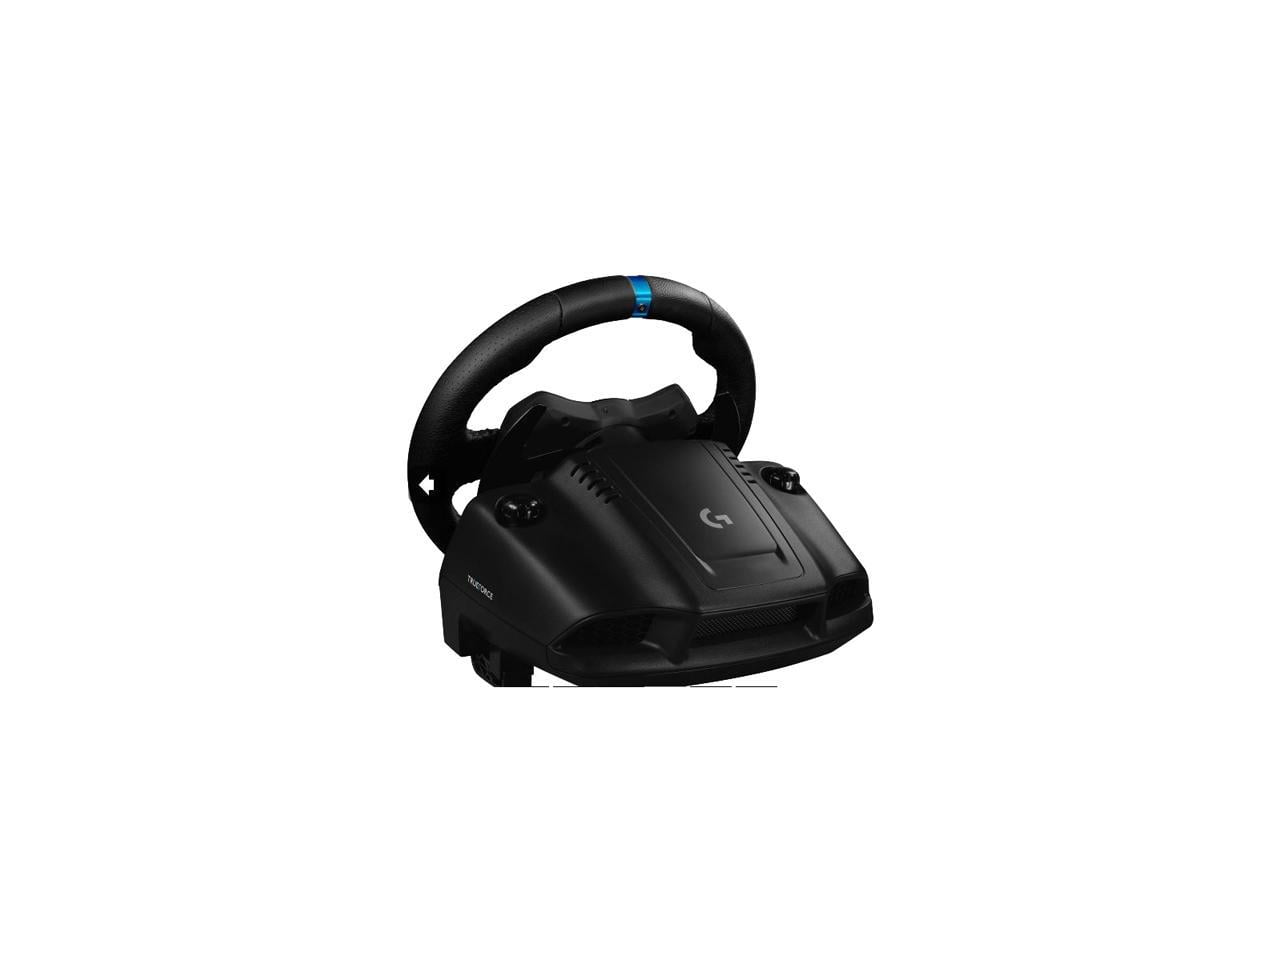  Logitech G923 Racing Wheel and Pedals for Xbox XS, Xbox One  and PC Featuring TRUEFORCE up to 1000 Hz Force Feedback, Responsive Pedal,  Dual Clutch Launch Control, and Genuine Leather Wheel